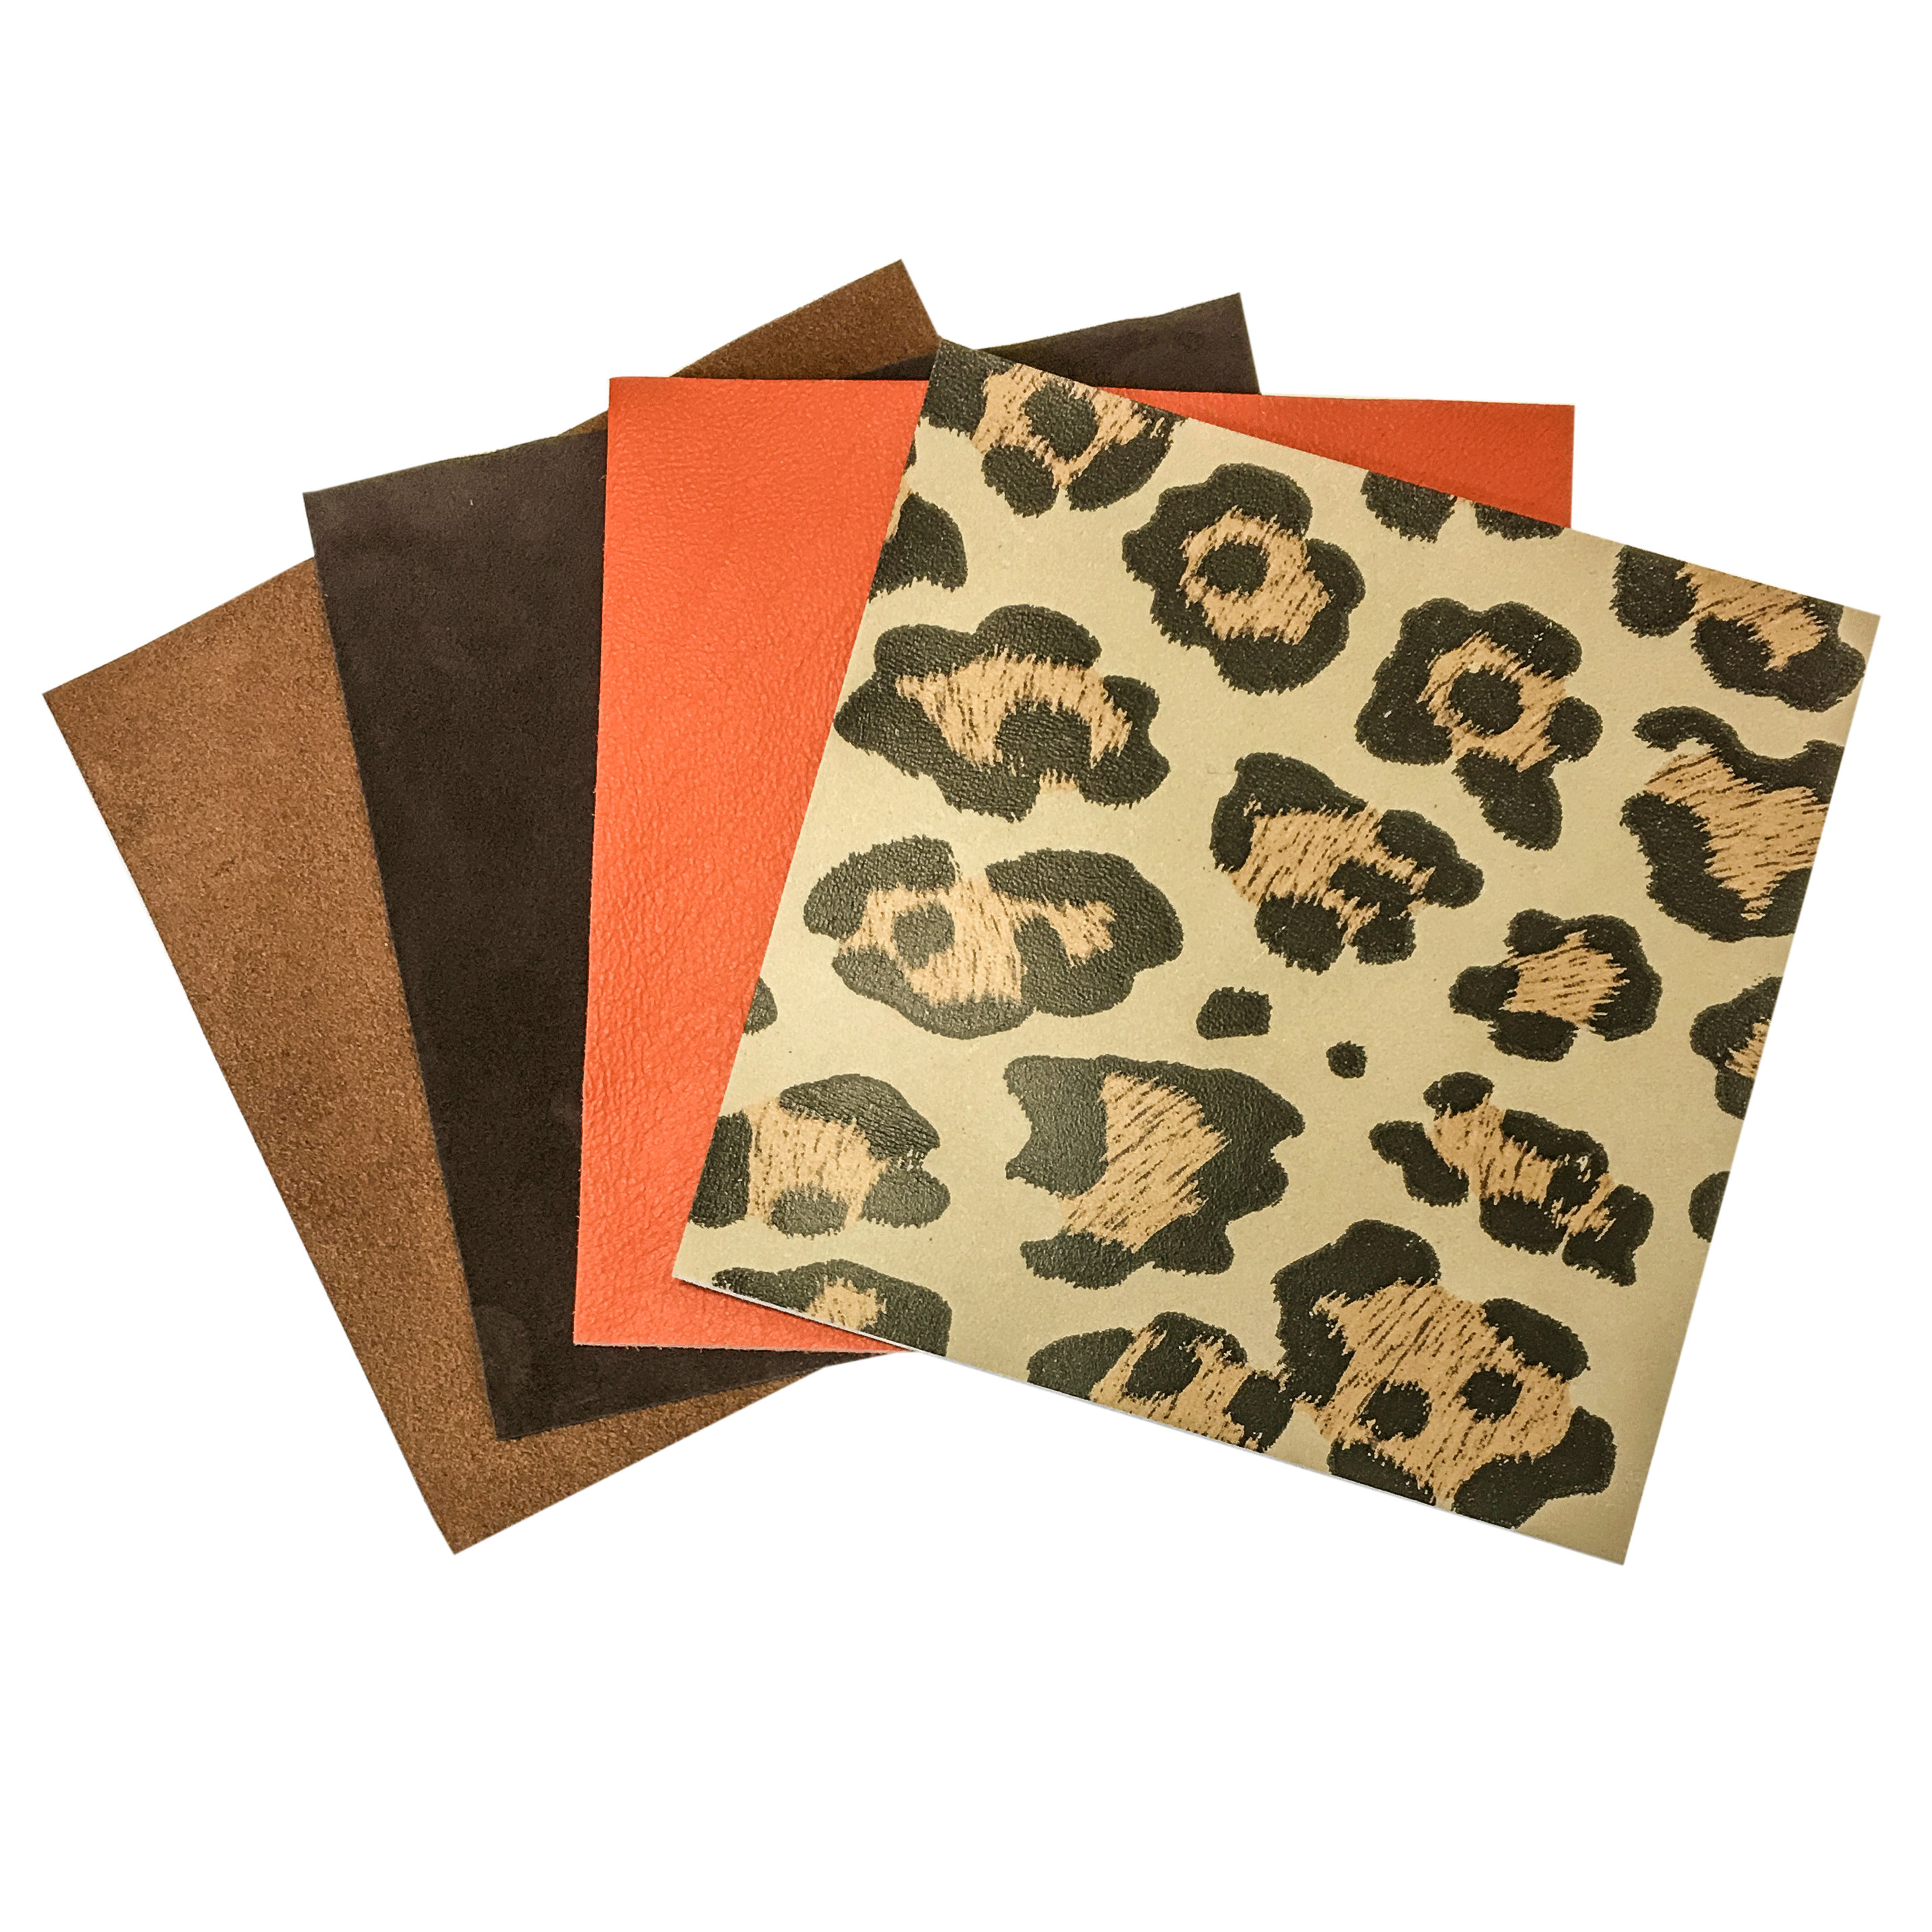 10 Leather sheets, ramdom assortment of selected PRE-CUT leather